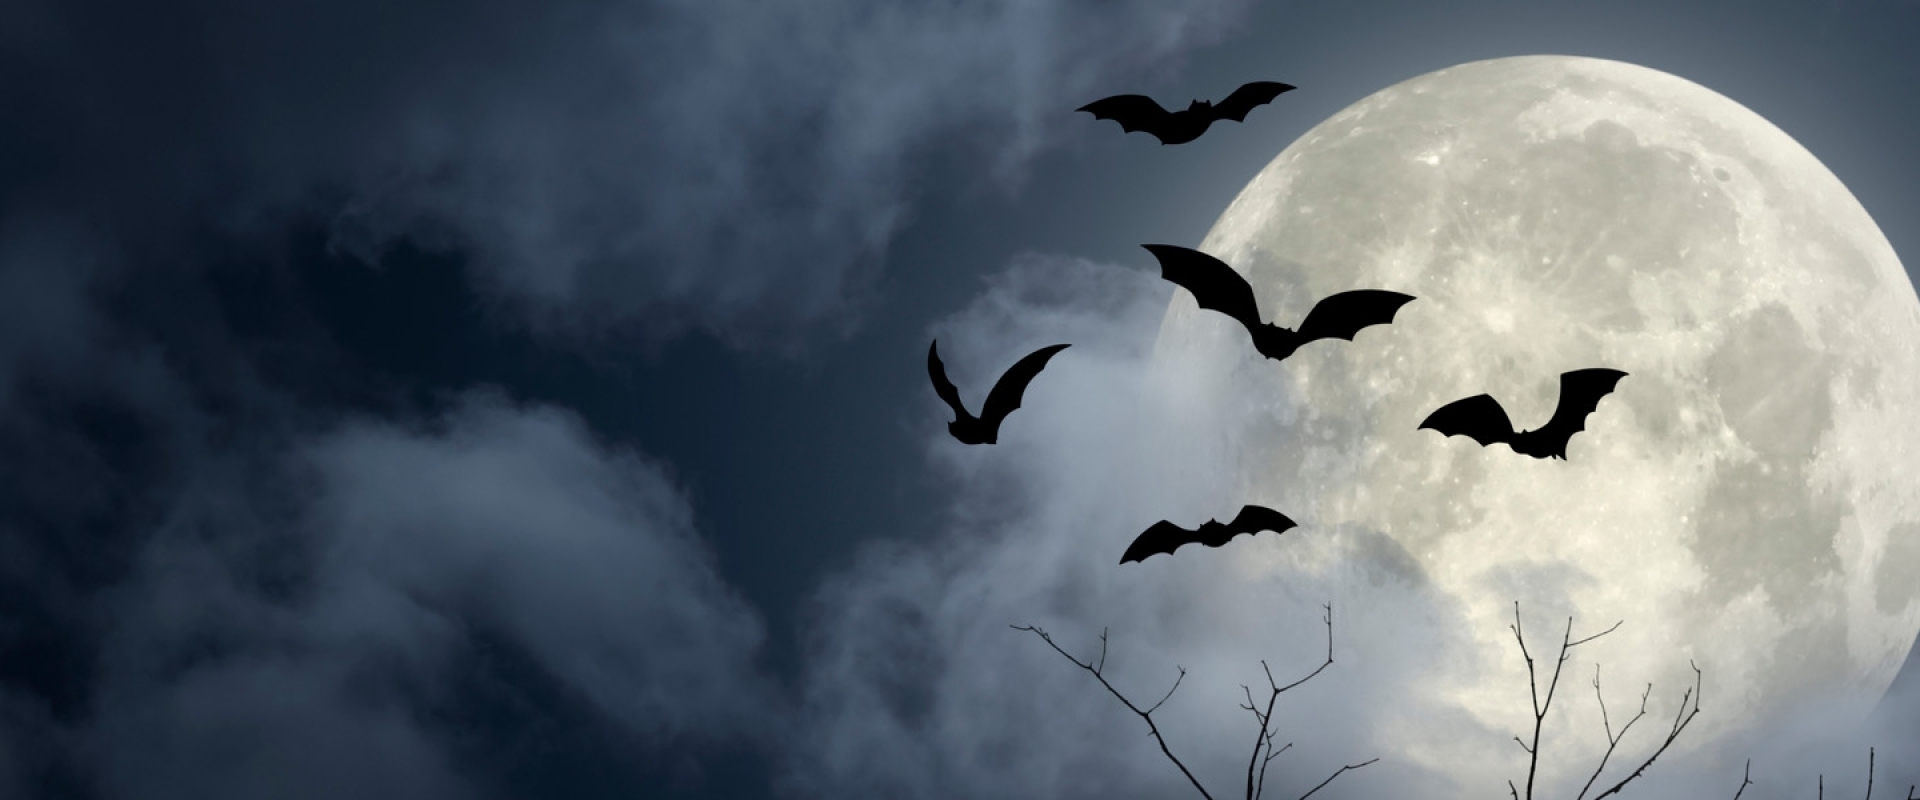 An illustration of bats flying in front of a full moon